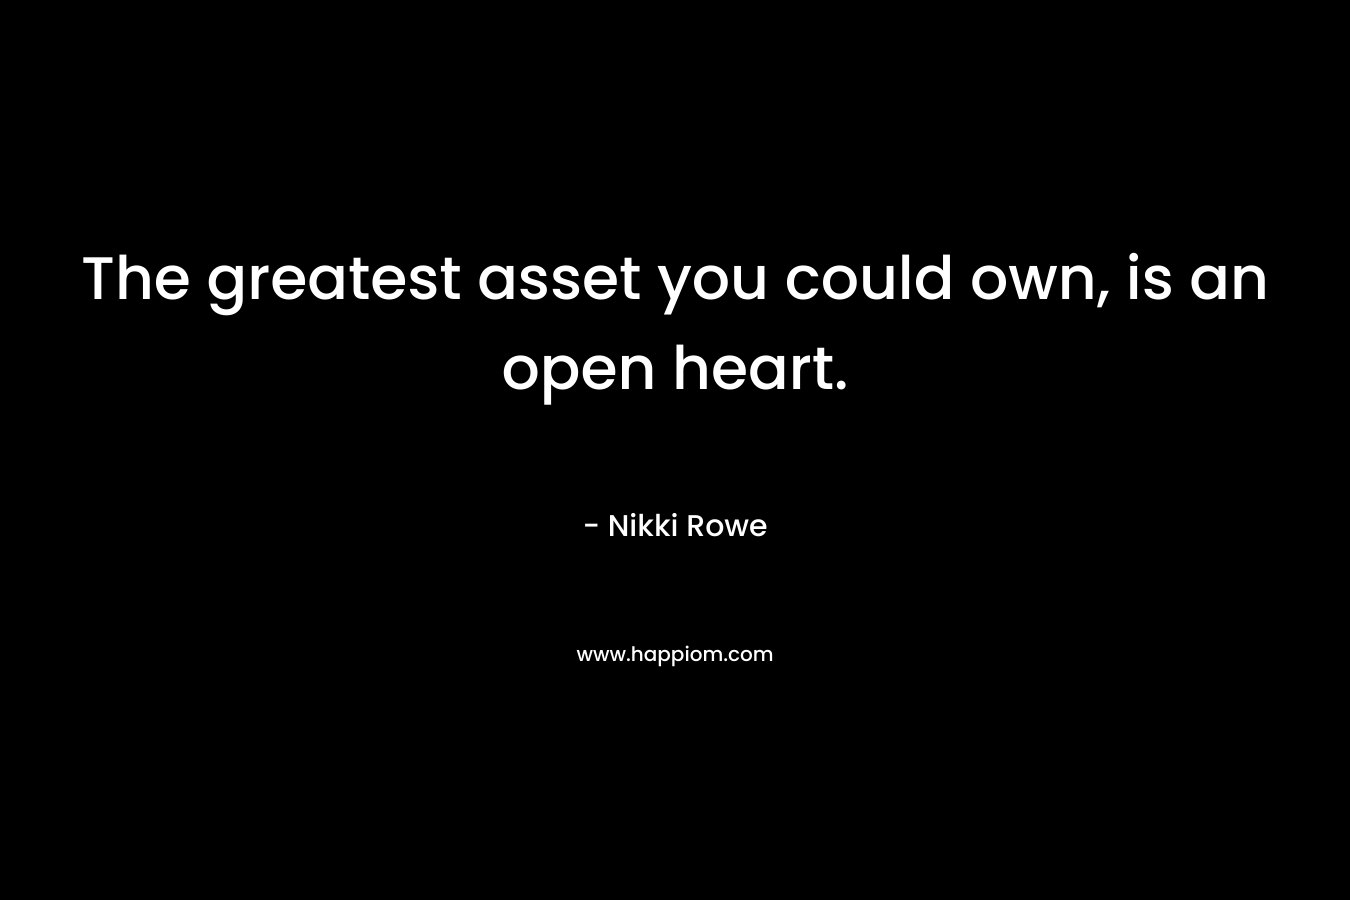 The greatest asset you could own, is an open heart. – Nikki Rowe